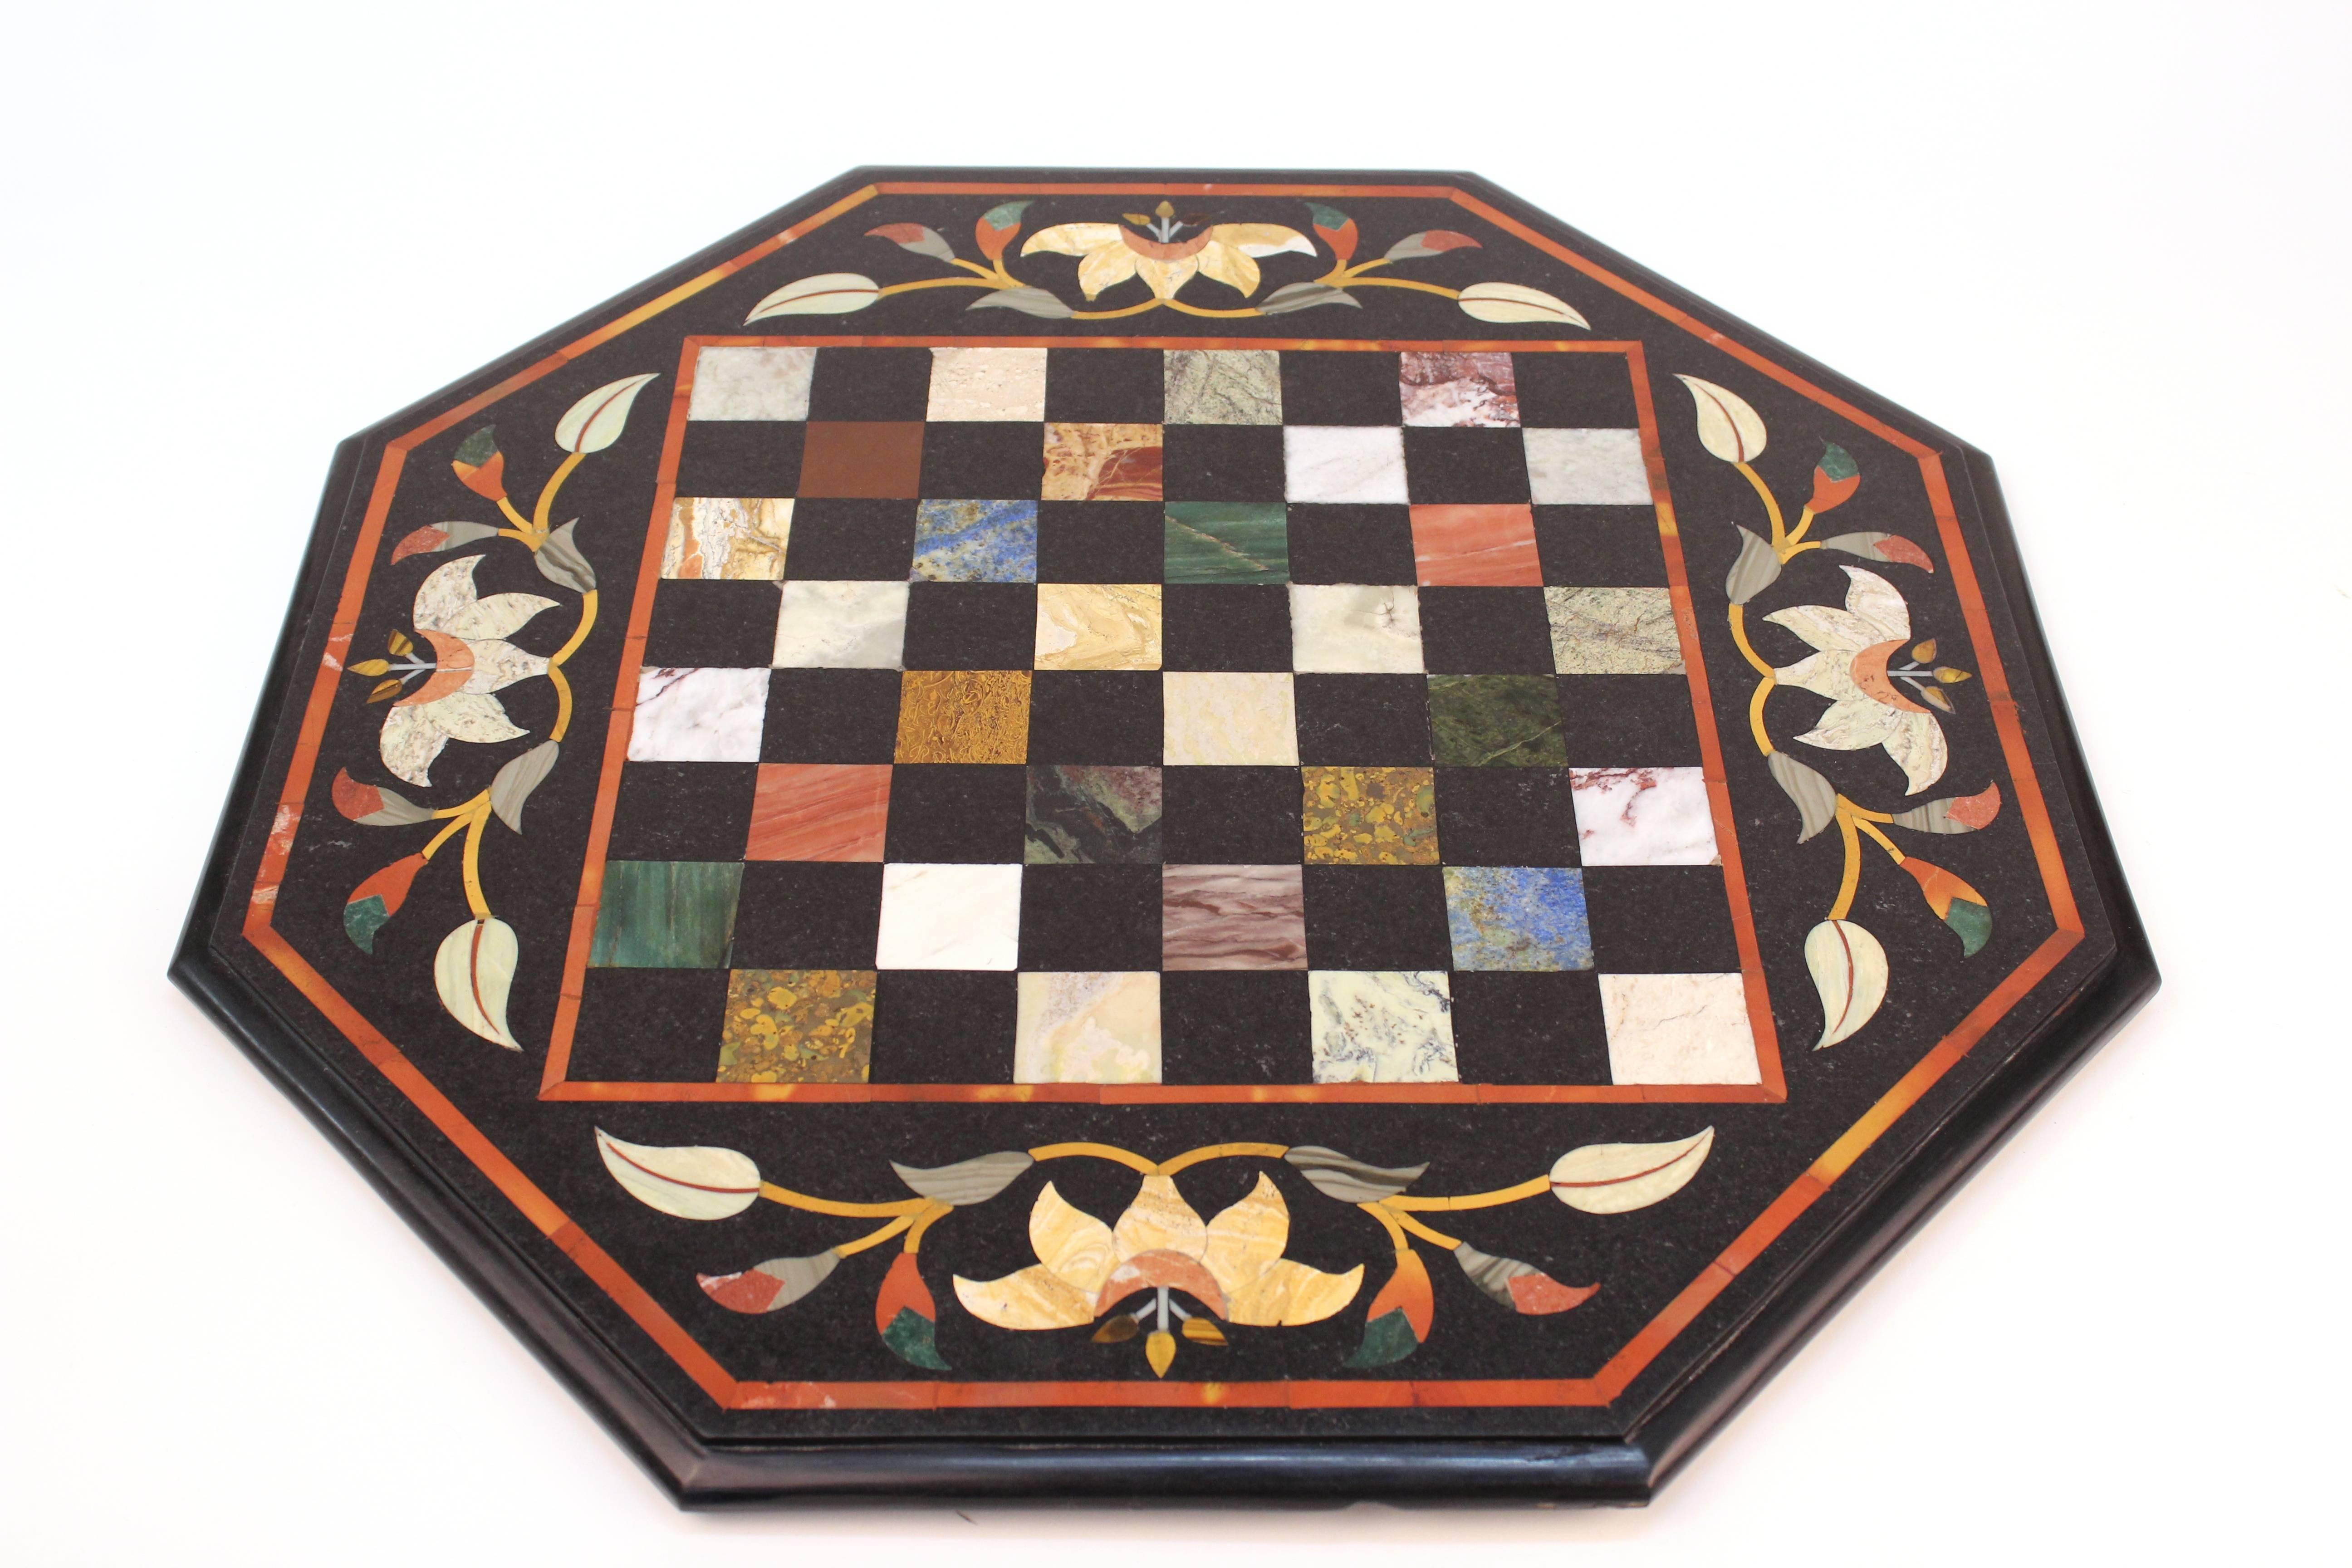  A chess board crafted using the Pietra Dura technique out of malachite, lapis, onyx and marble. Includes 32 bone and wood chess pieces. Produced in Italy during the 1960s. 

110485